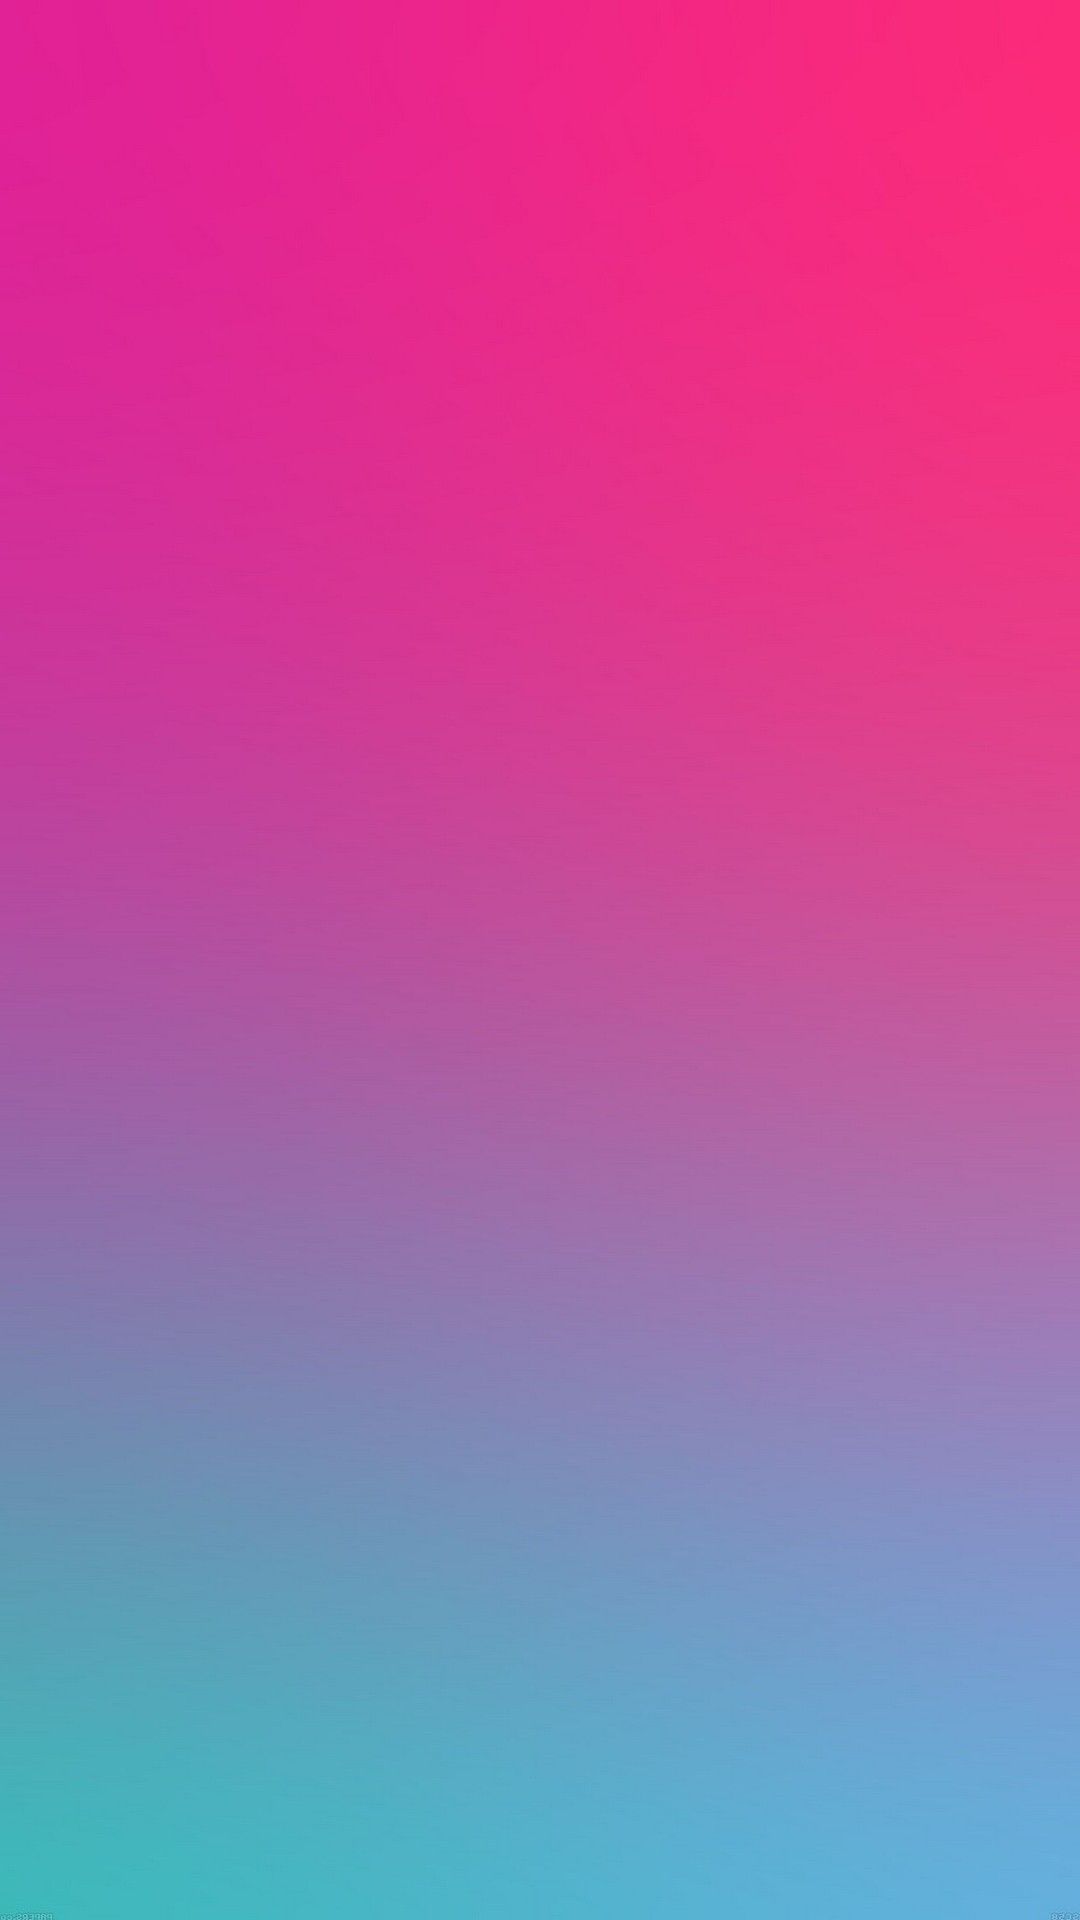 Gradient Wallpaper Android Android Wallpaper